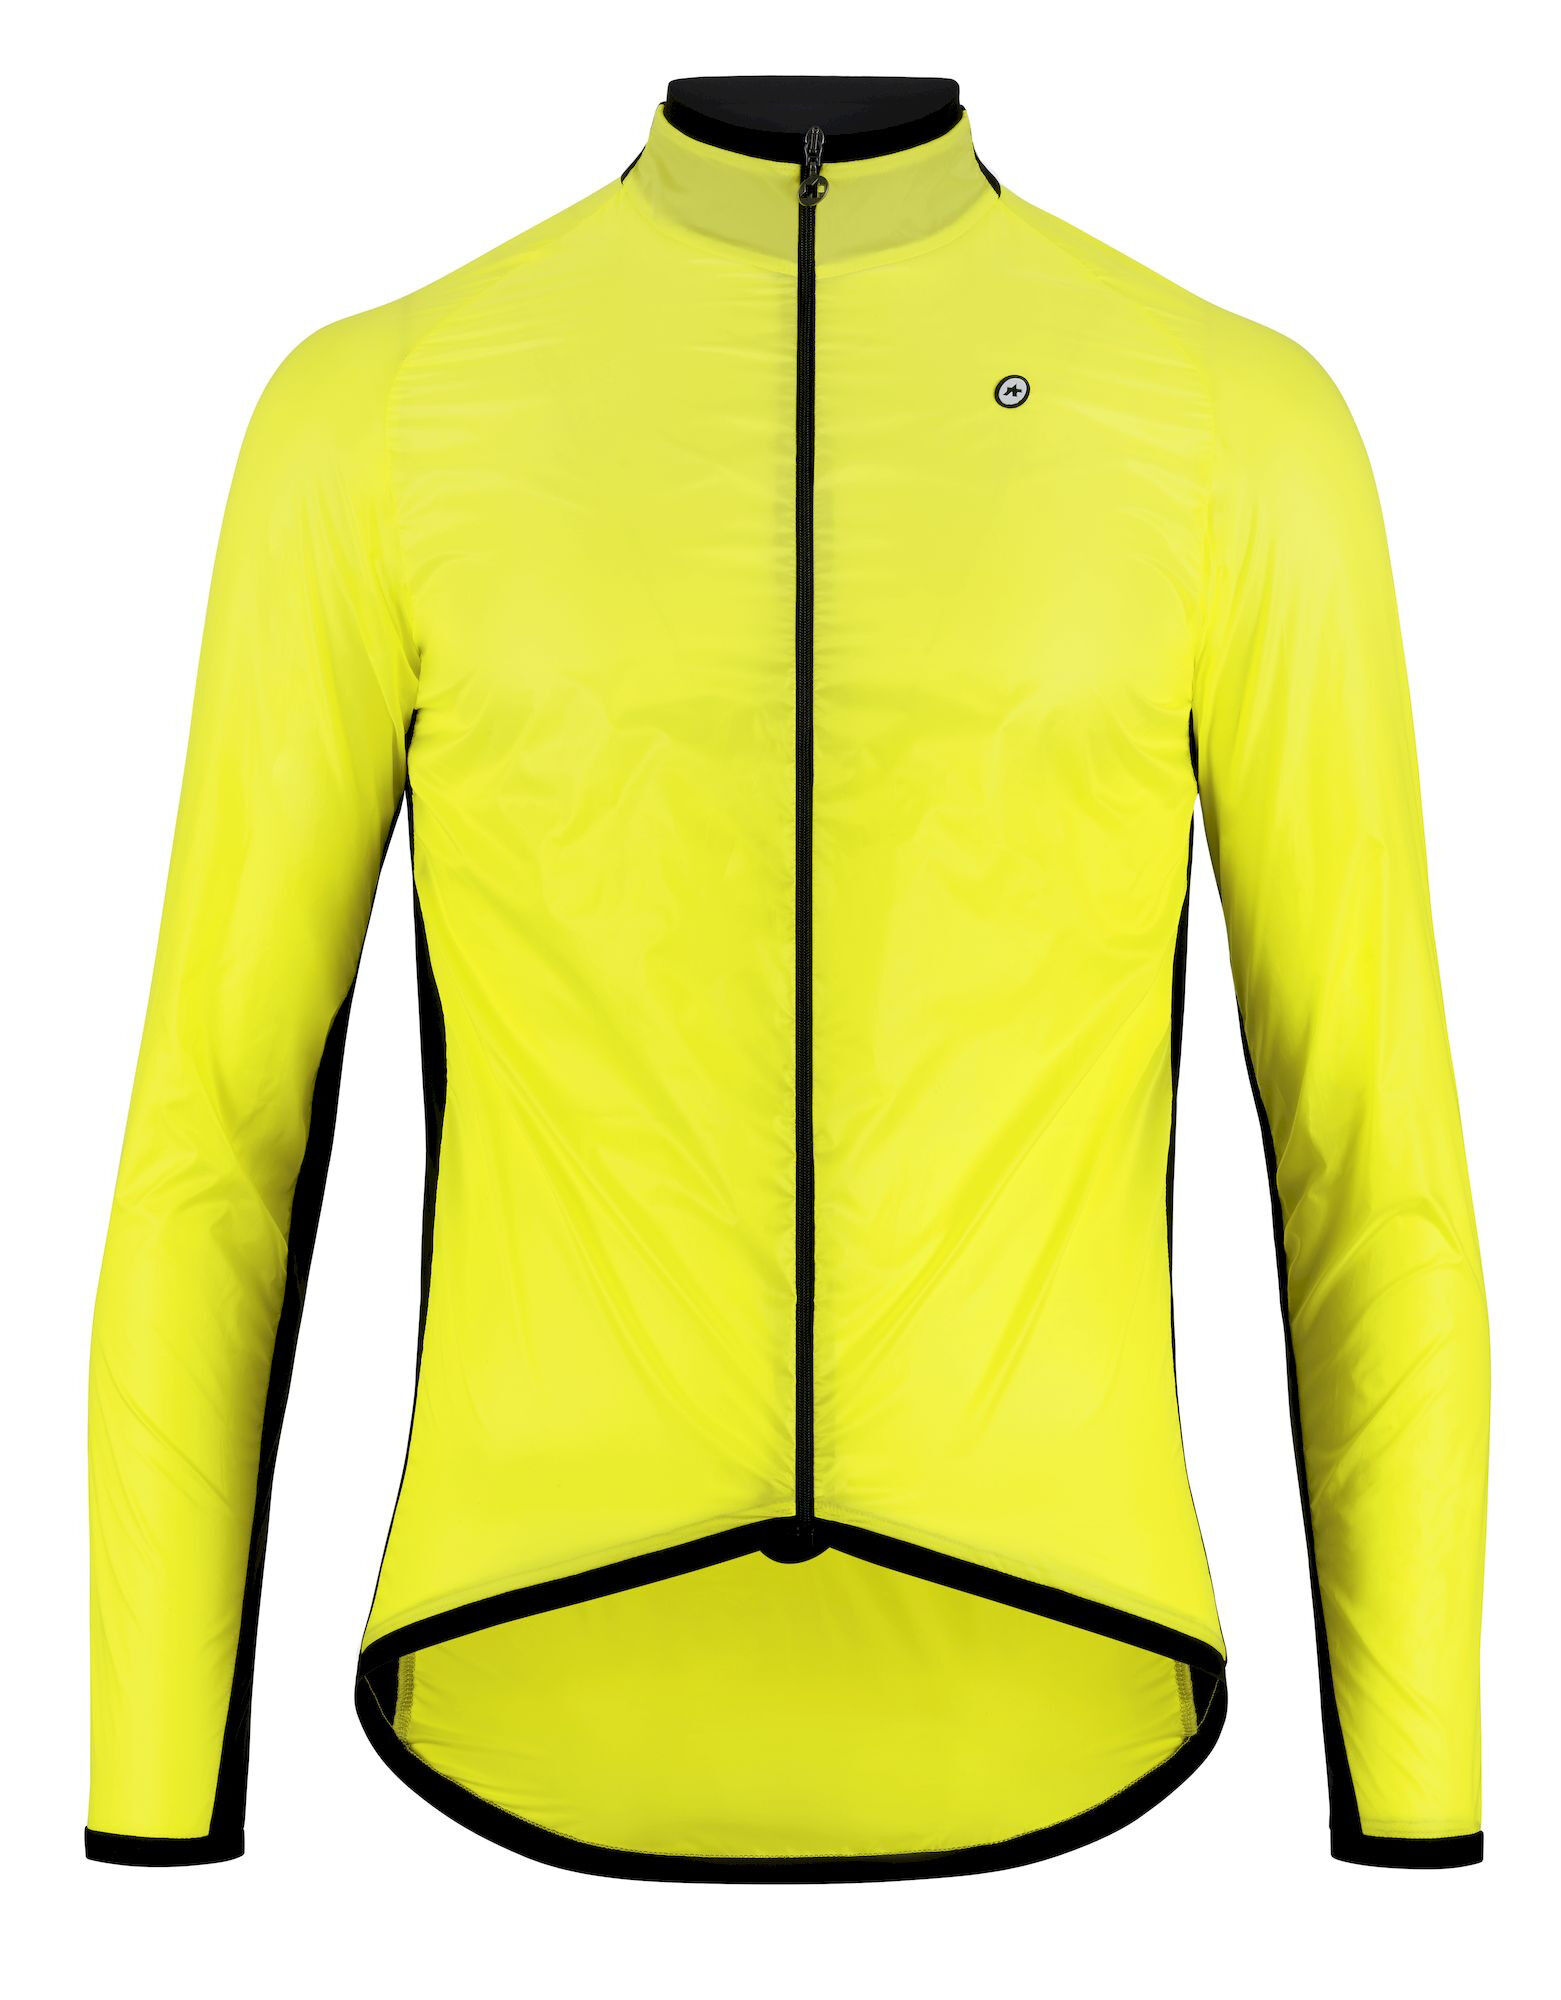 Assos Mille GT Wind Jacket C2 - Giacca a vento ciclismo - Uomo | Hardloop